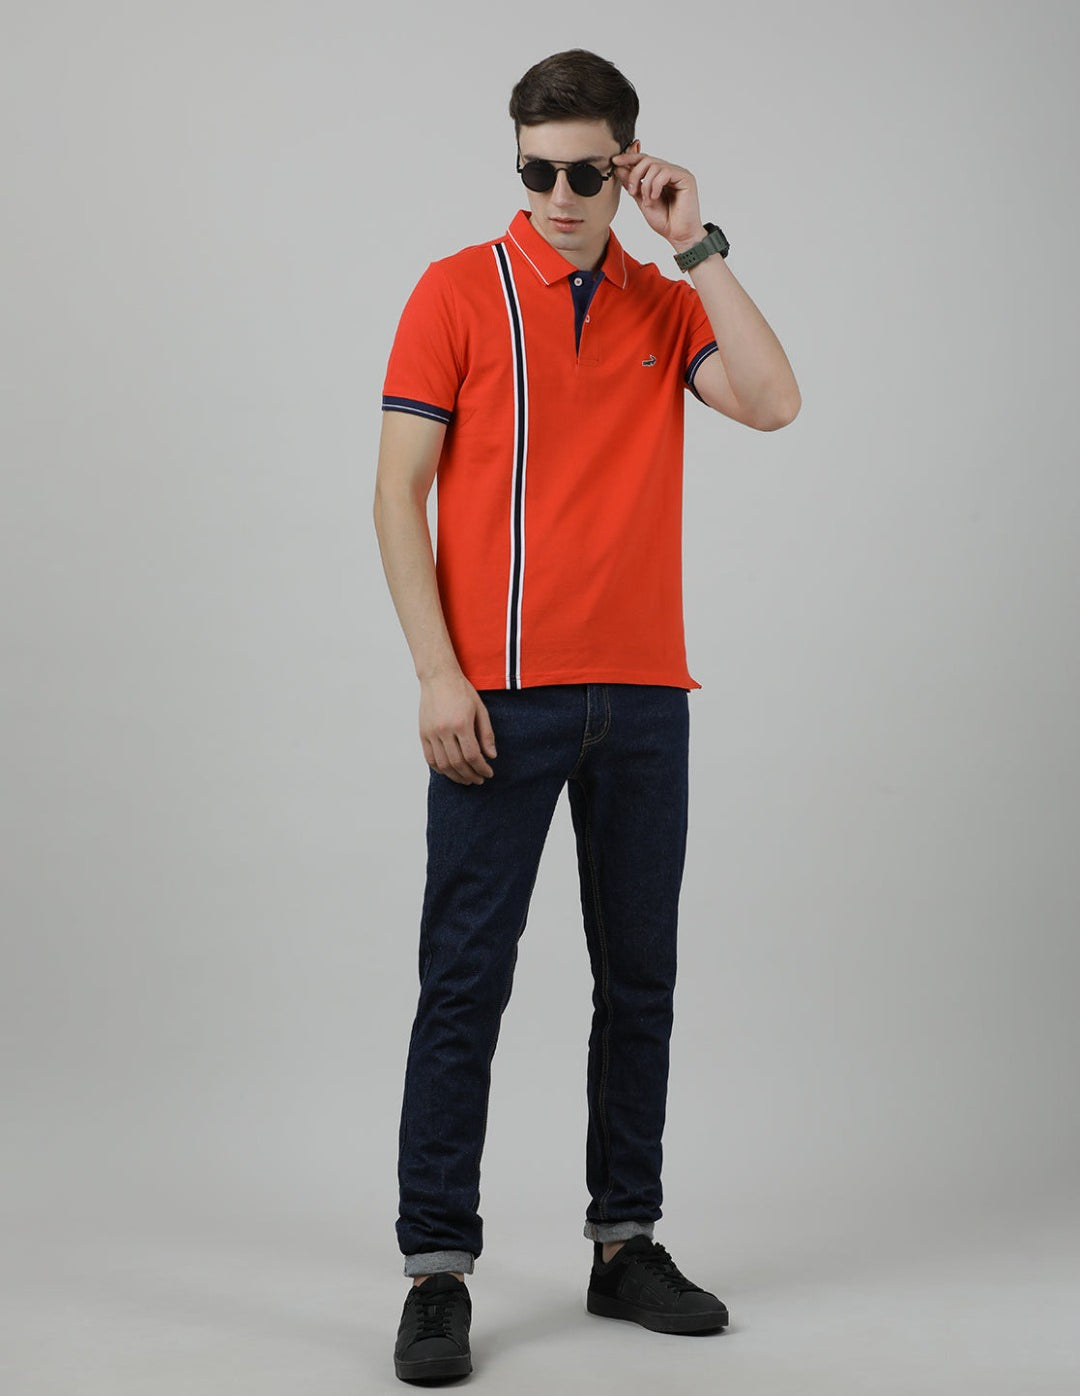 Crocodile Casual Red Solid Polo T-Shirt Half Sleeve Slim Fit with Collar for Men